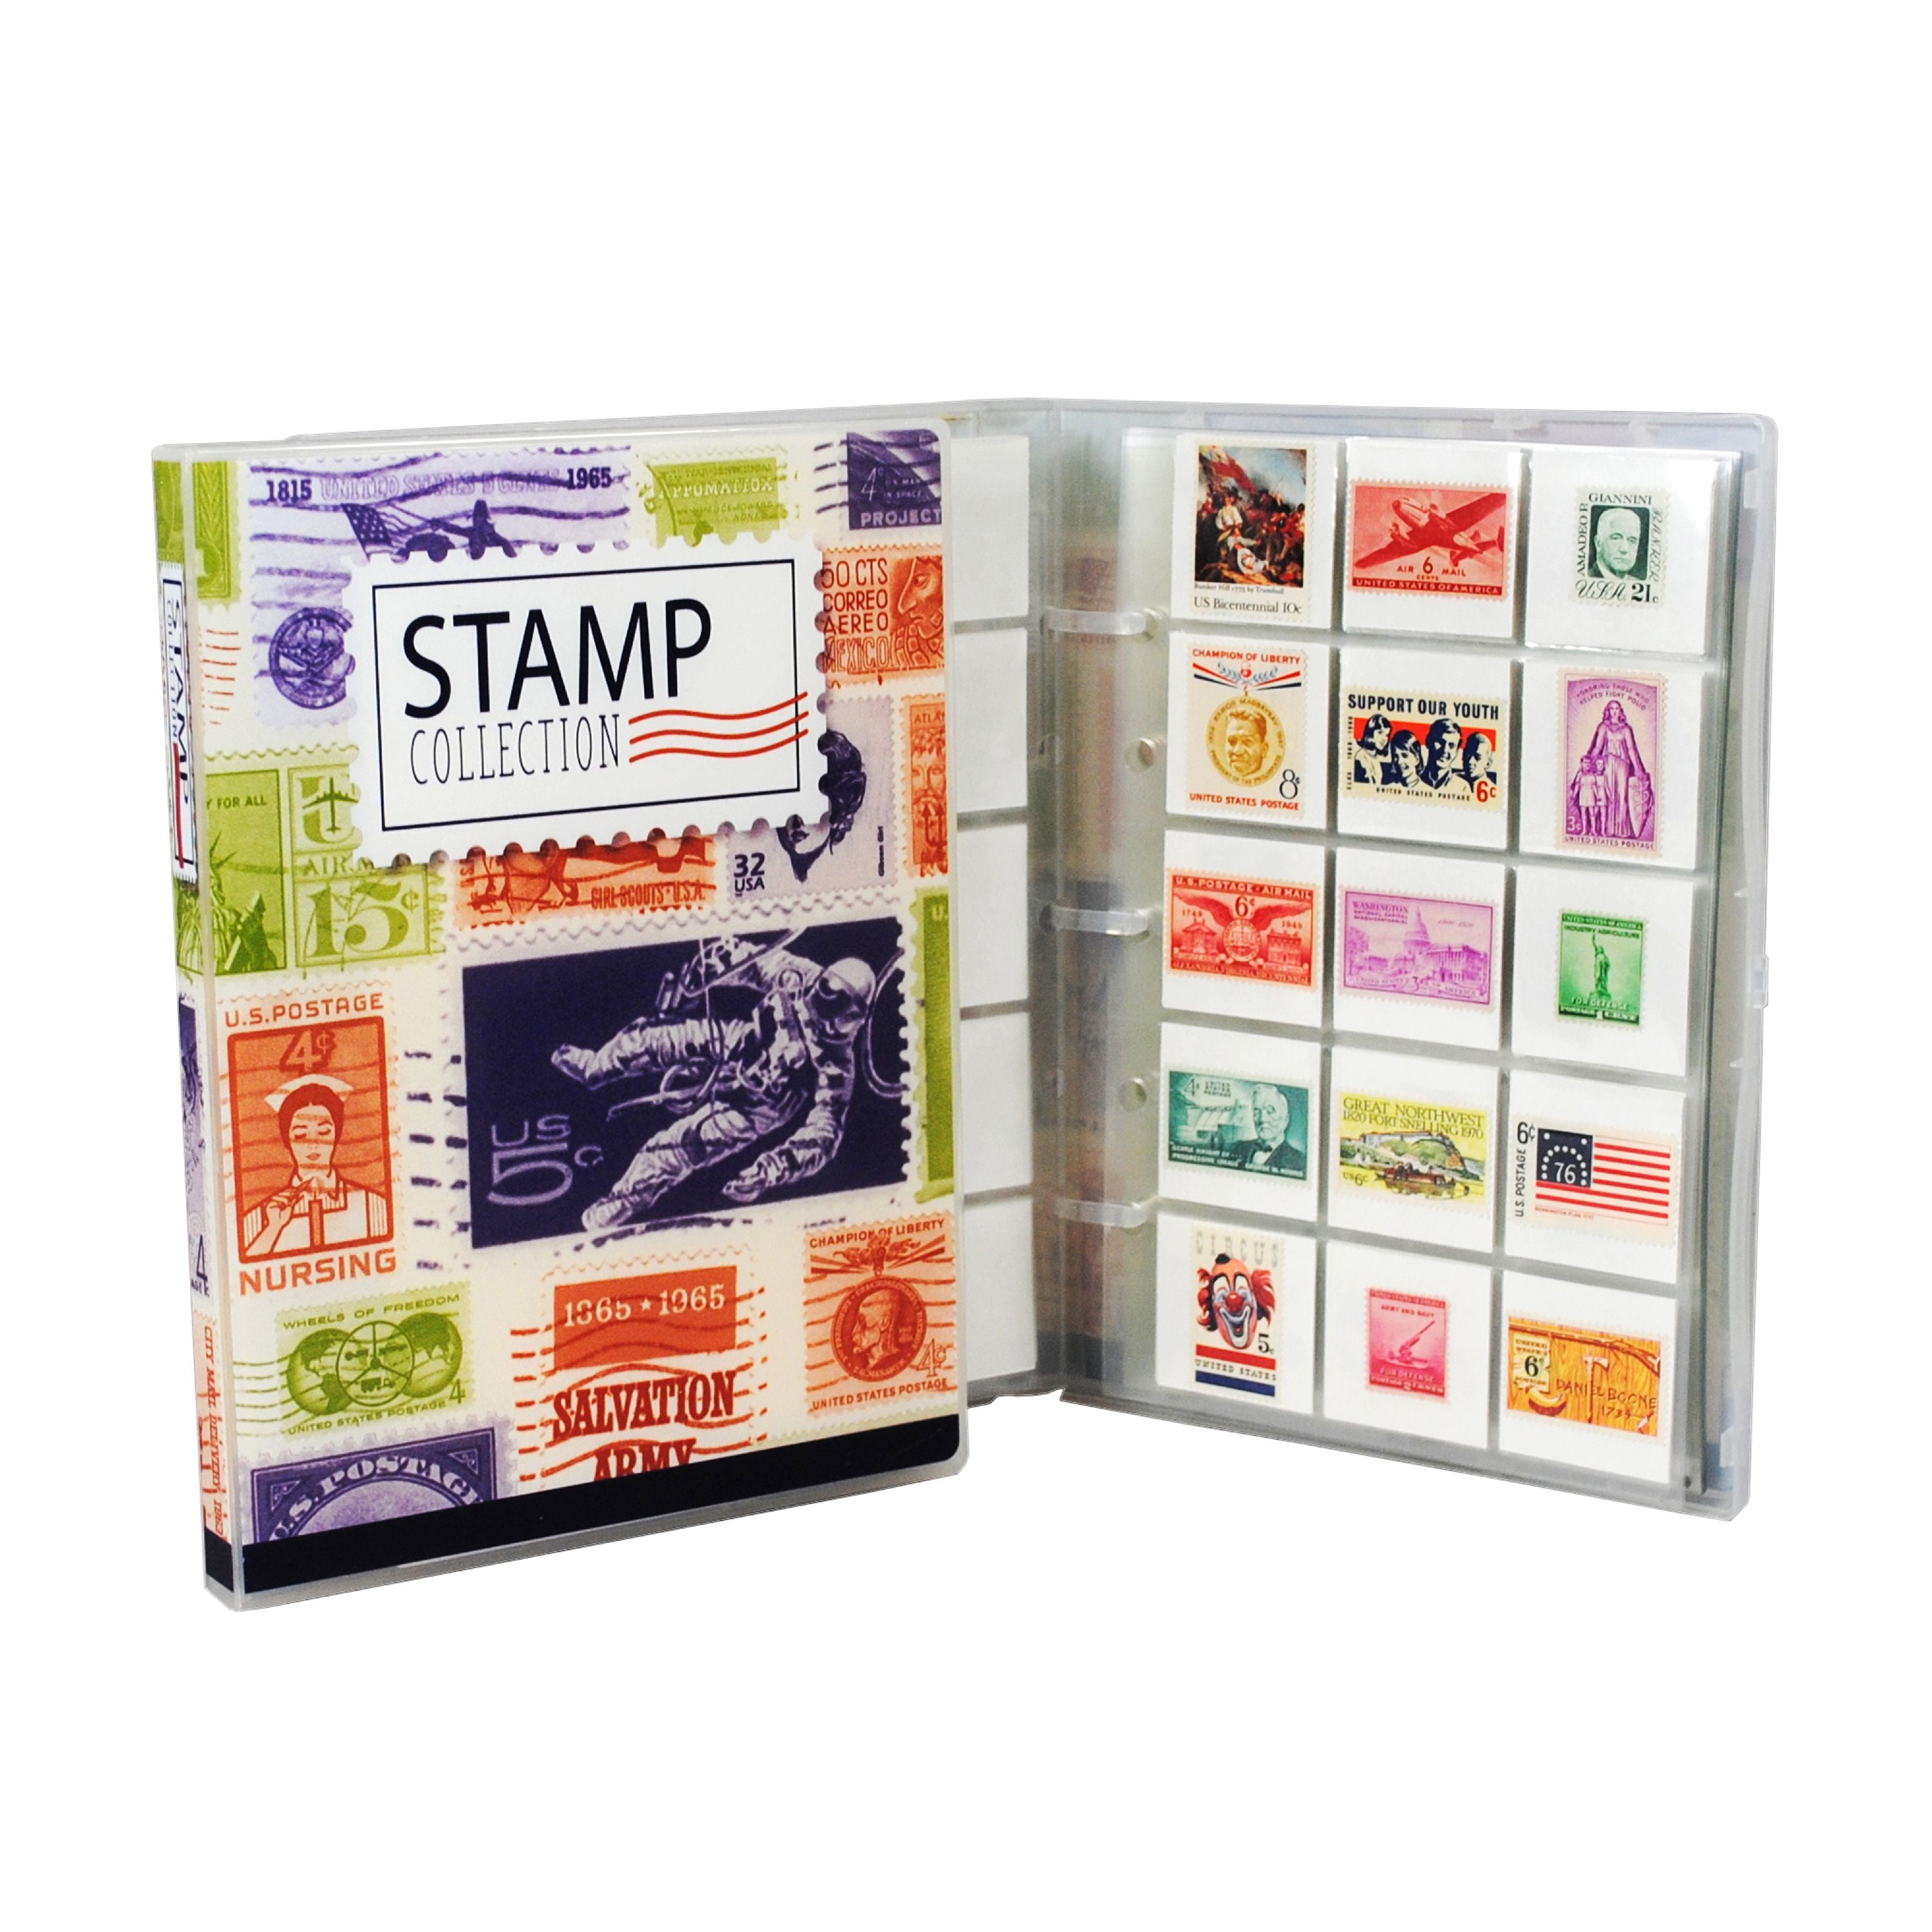 Wholesale postage stamp album Available For Your Trip Down Memory